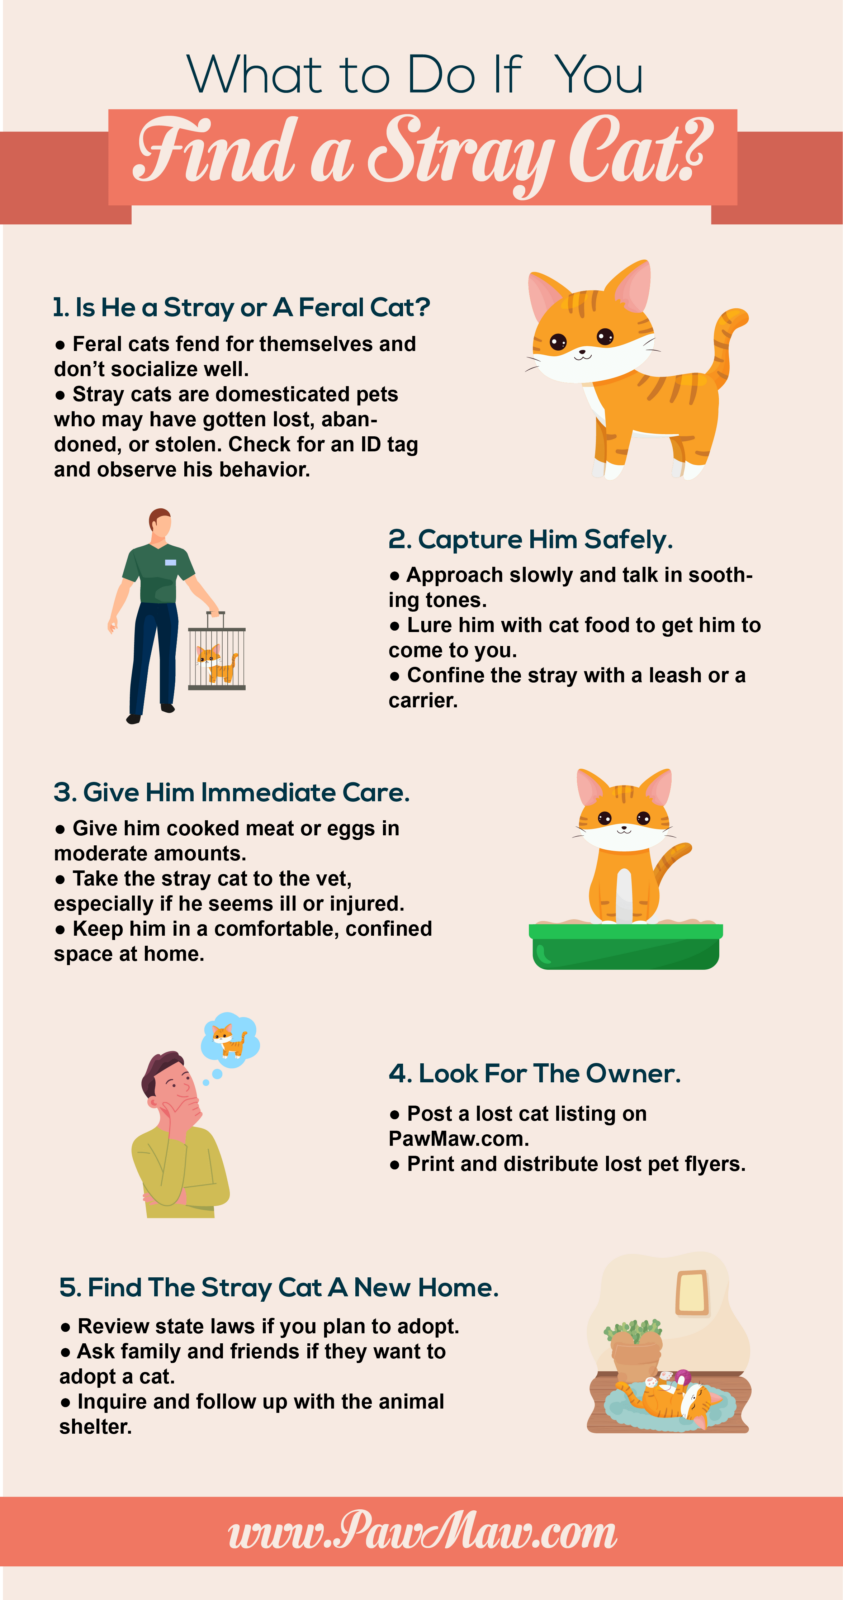 An infographic of what to do if you find a stray cat: Determine if stray or feral, capture safely, give immediate care, seek out a possible owner, and work to find a stray cat a new home.